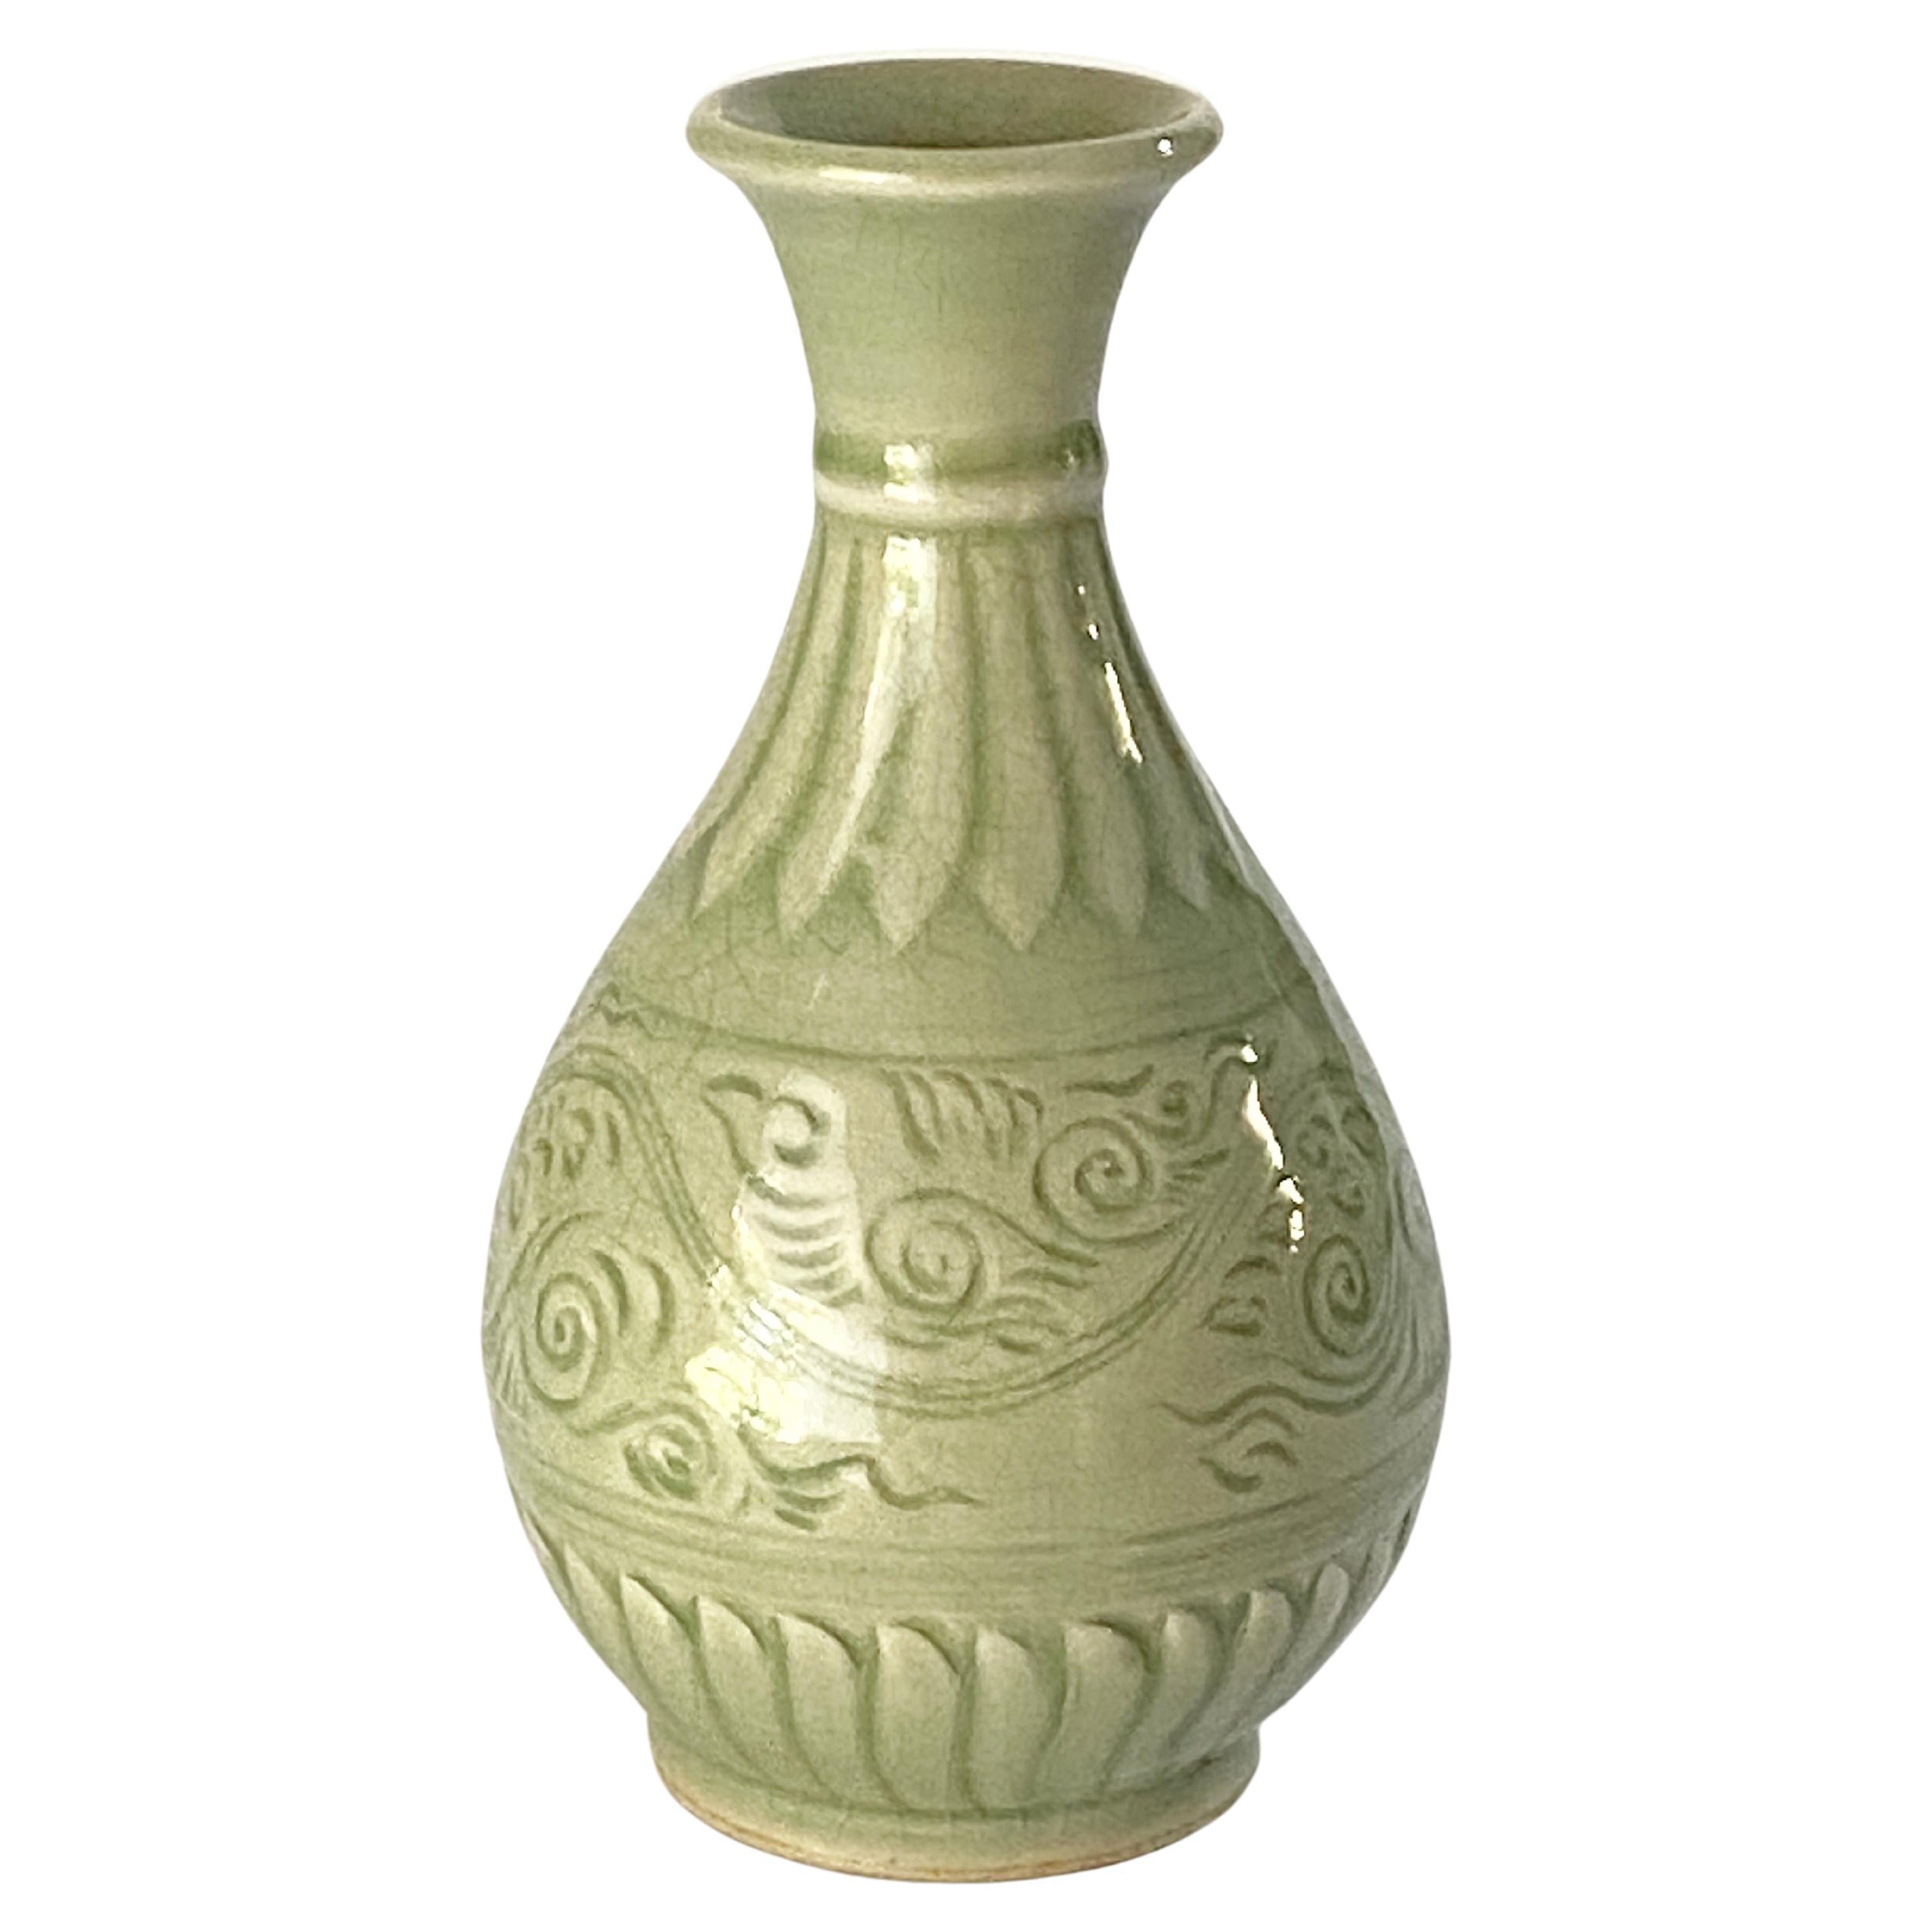 Celadon Vase, in a Green Color, Ceramic, Mid-20th Century, Made in China